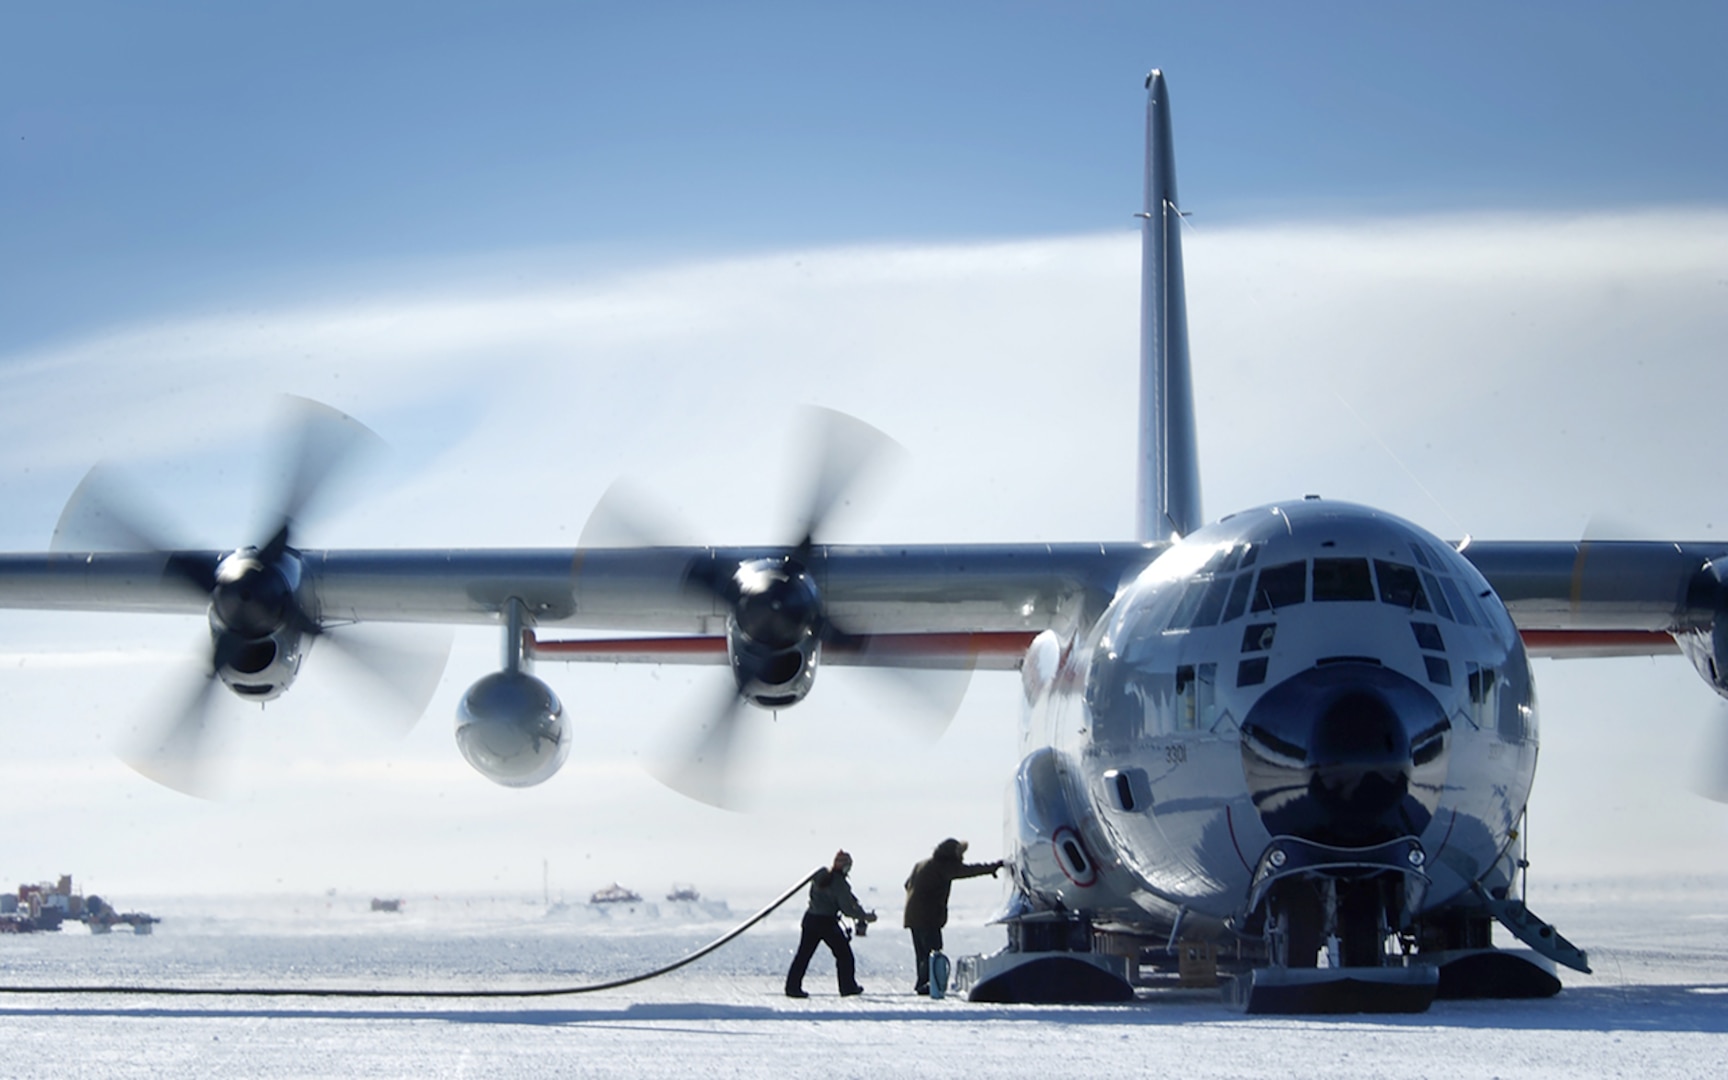 A New York Air National Guard LC-130 Hercules unloads DLA Energy-procured fuel supplied during a prior annual Operation Deep Freeze Antarctic refueling mission. The aircraft is used to deliver fuel and supplies to remote locations throughout the continent.